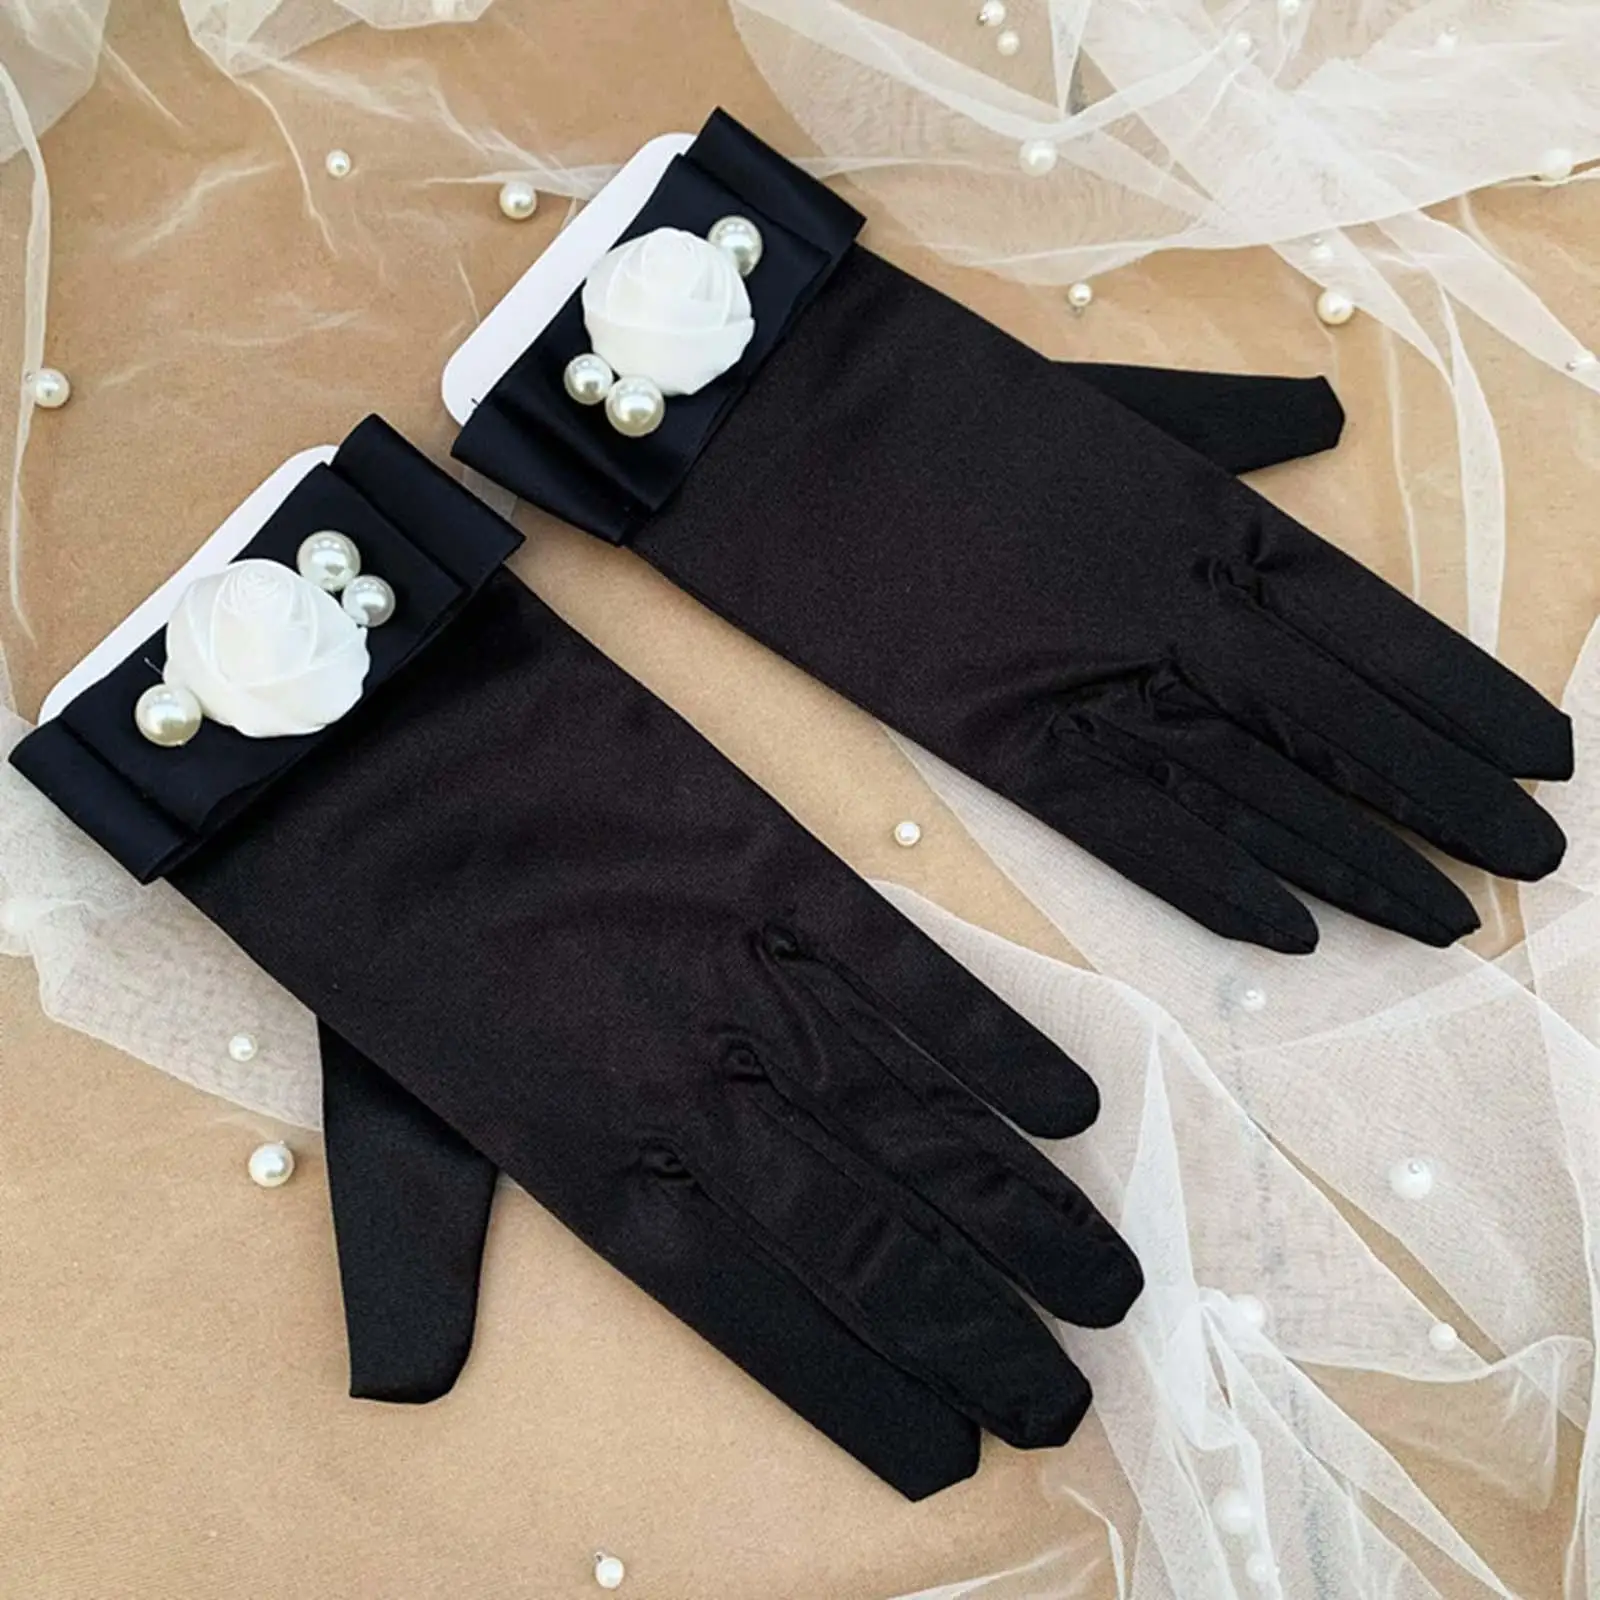 2Pcs Short Satin Gloves Glossy Stretchable Wrist Length Gloves for Ballet Show Parties